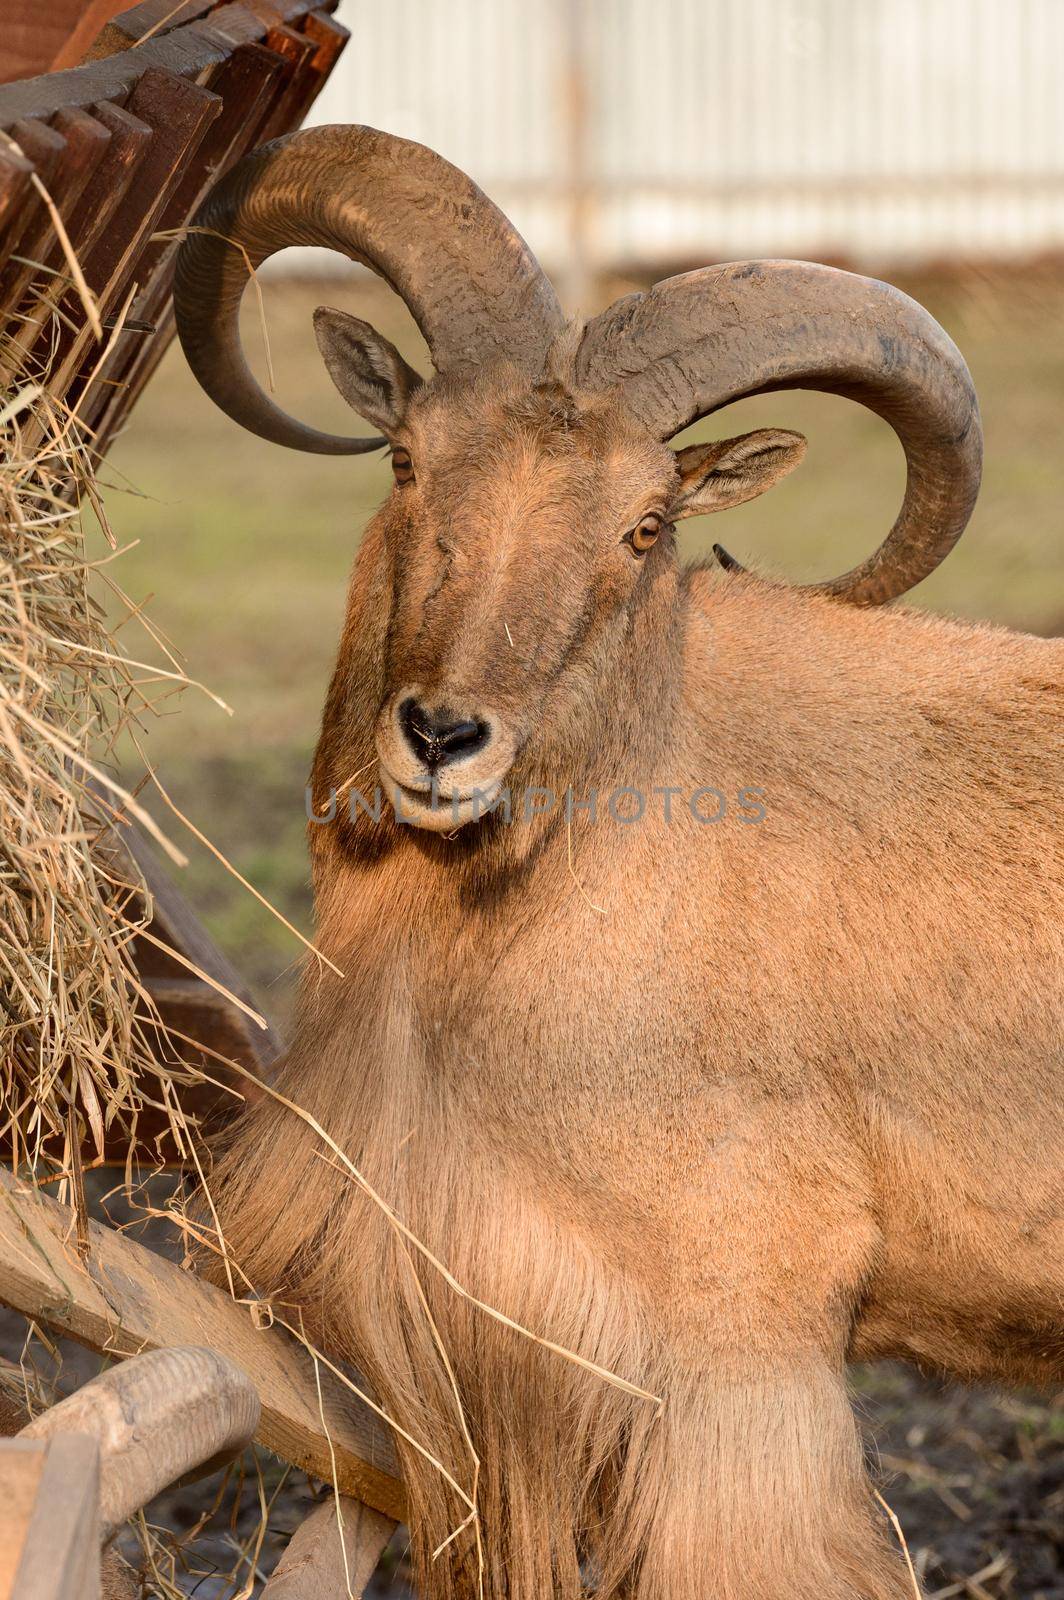 The maned ram eats hay, the animal in the zoo, the large rounded horns of the ram.